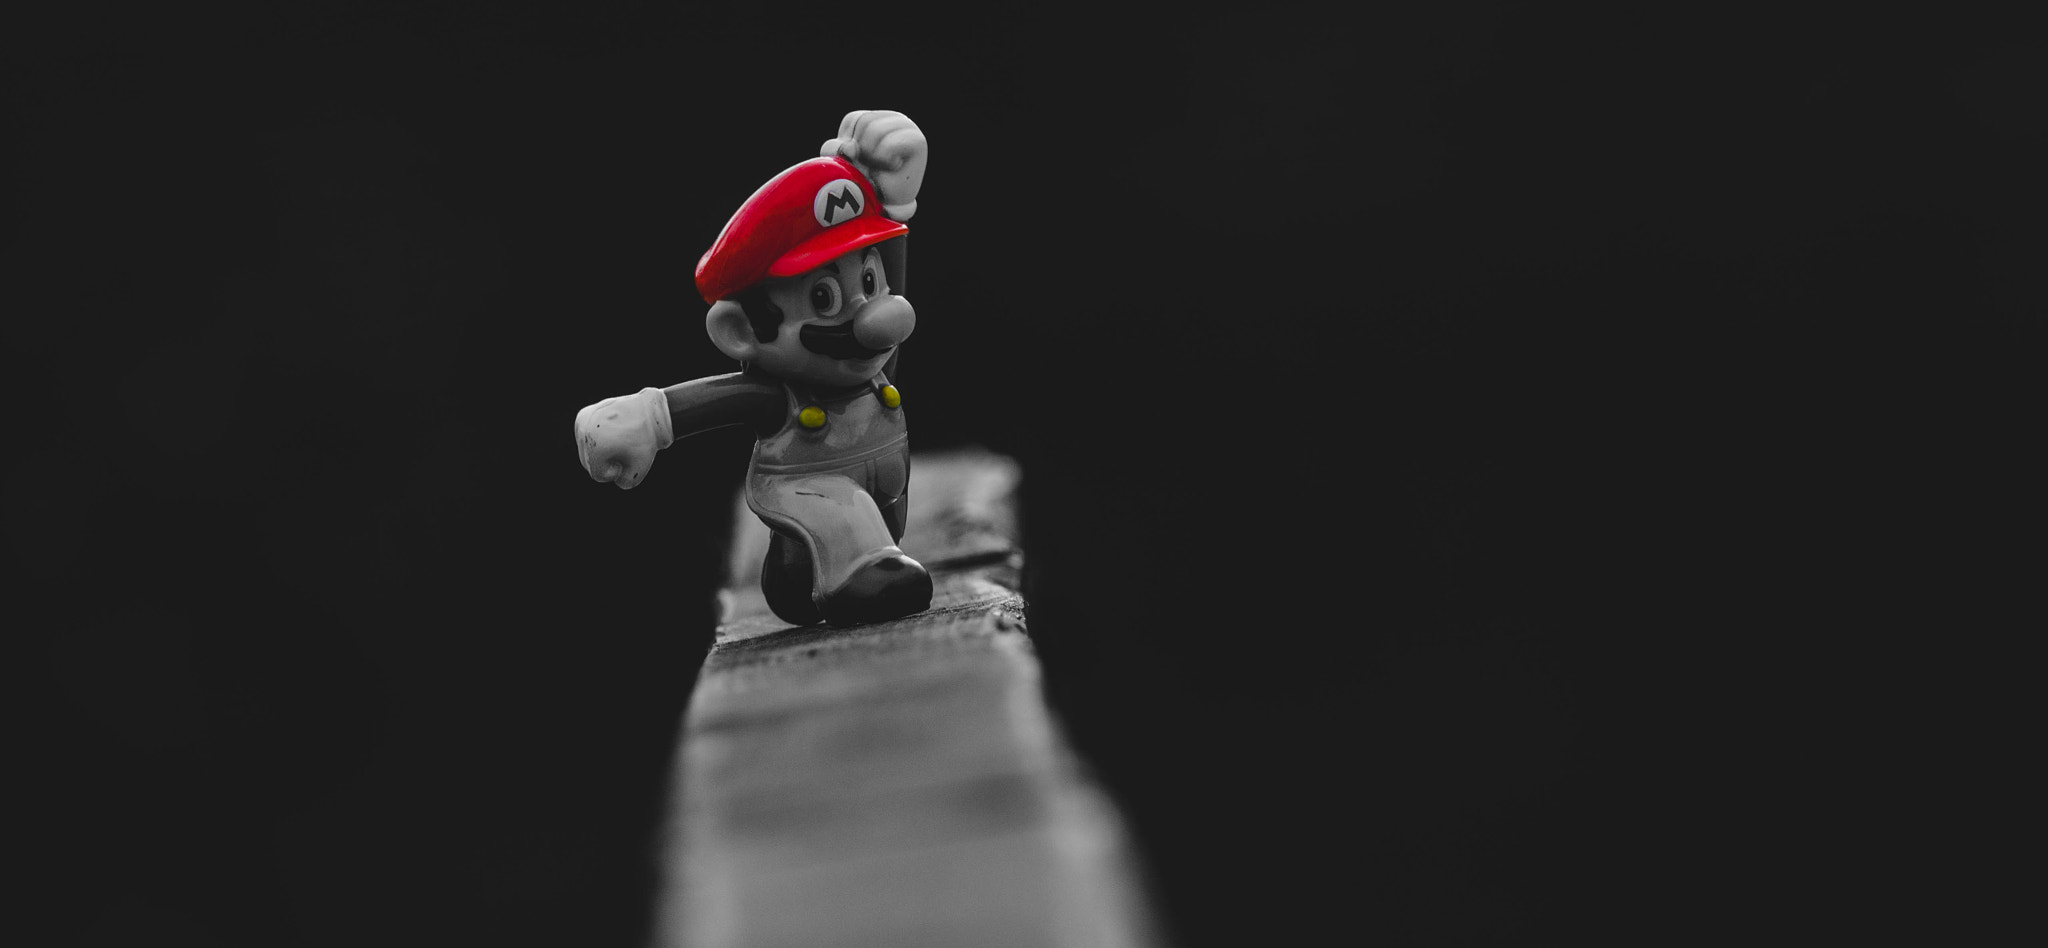 General 2048x948 500px red toys selective coloring Super Mario video game characters